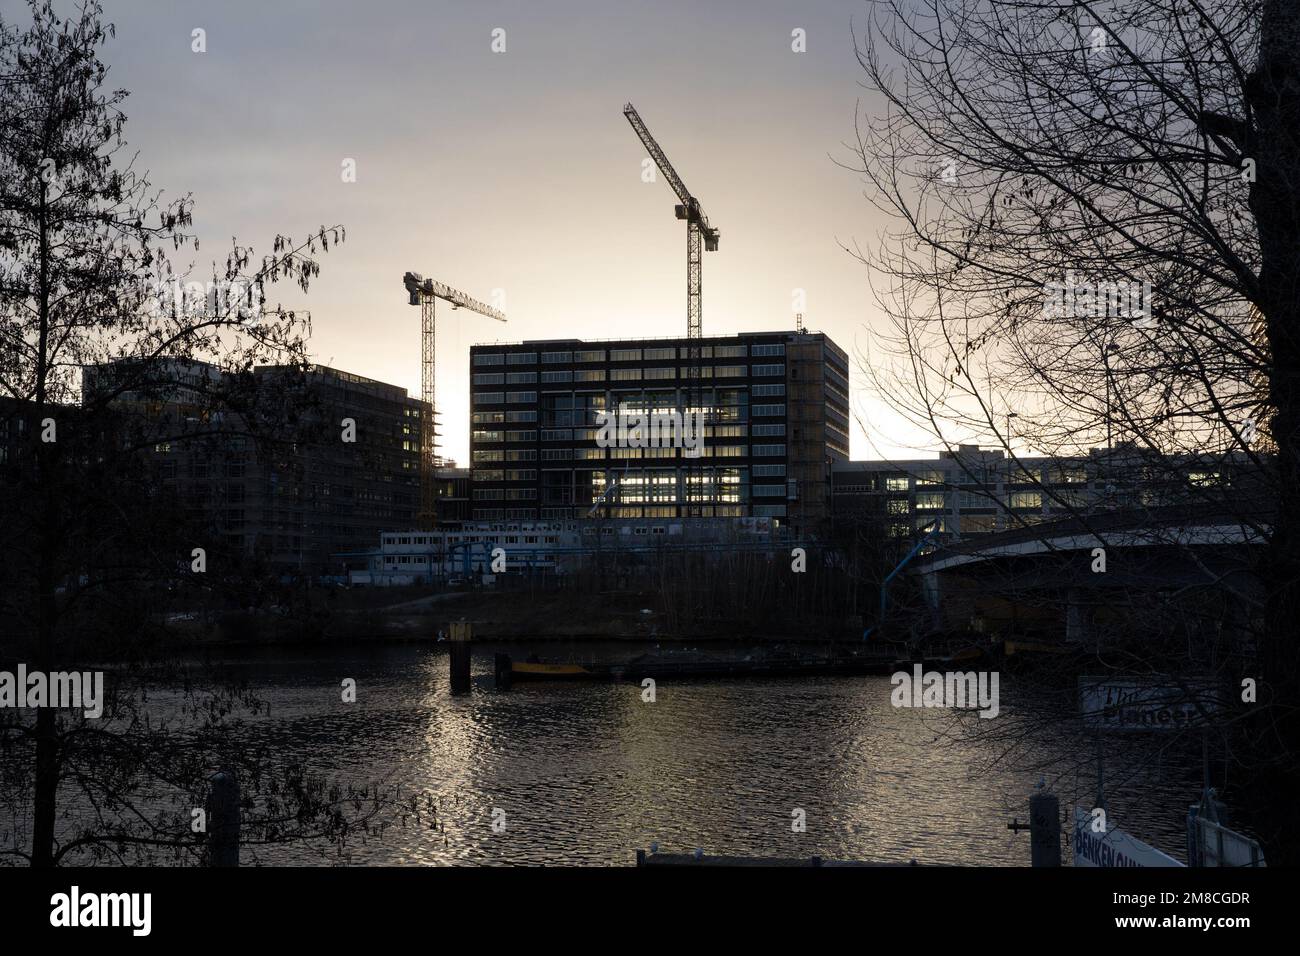 Berlin, Germany. 13th Jan, 2023. The Europacity, also known as the Heidestrasse Development Area or the Heidestrasse City Quarter o January 13, 2023, is a city planning development located primarily north of Europaplatz at the Berlin central train station. (Photo by Michael Kuenne/PRESSCOV/Sipa USA) Credit: Sipa USA/Alamy Live News Stock Photo